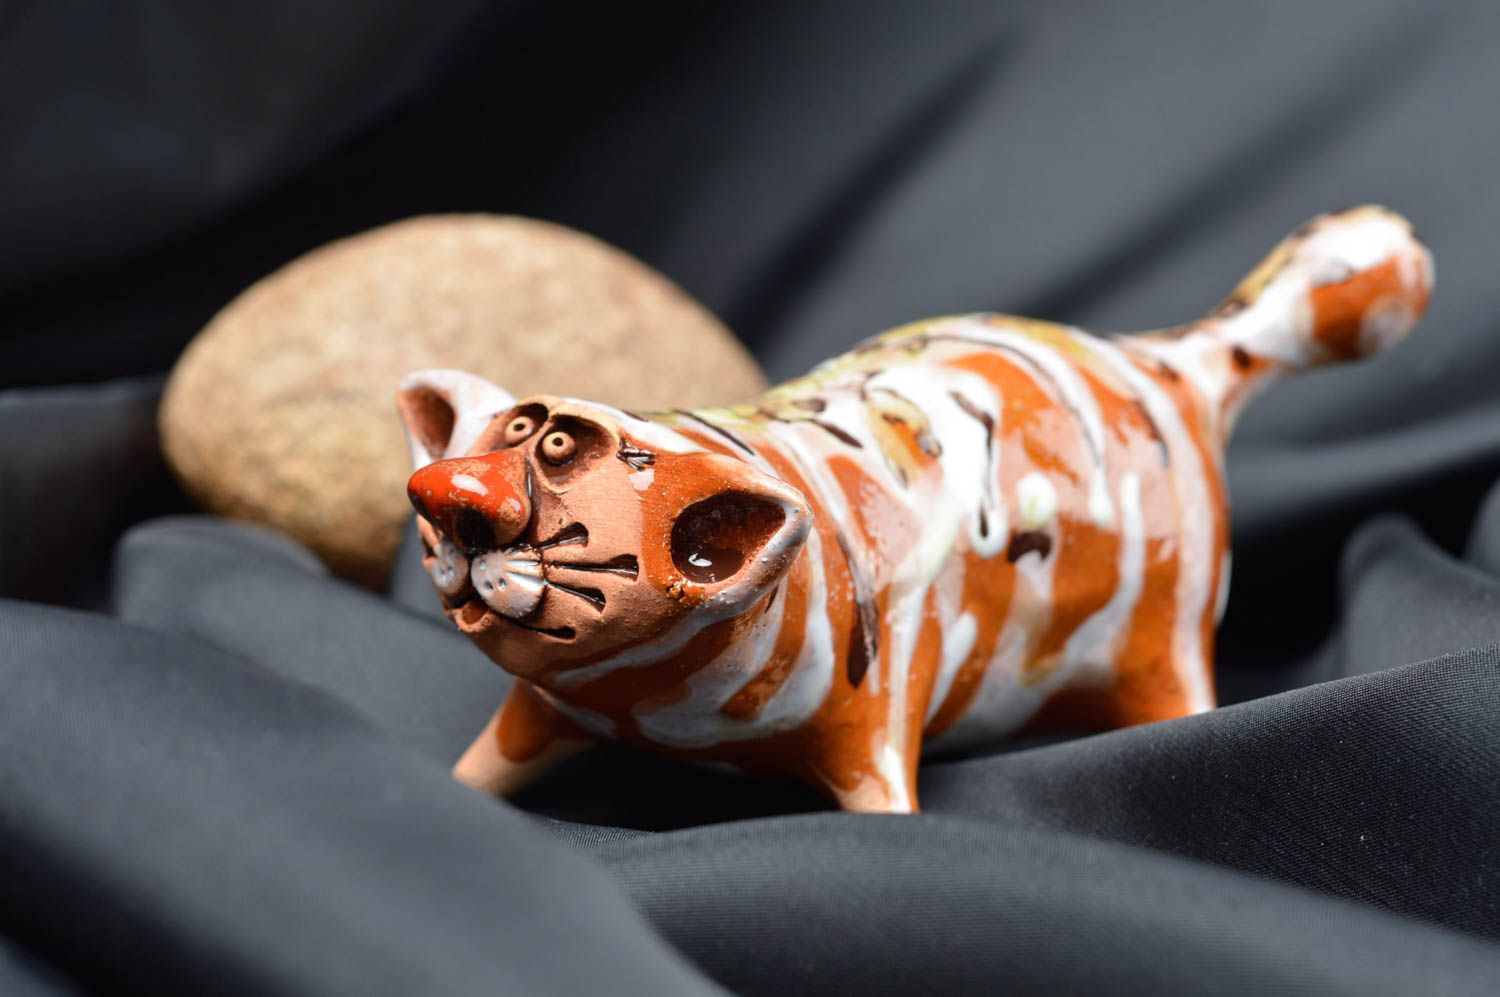 Cat figurines ceramic figurines homemade home decor gifts for cat lovers photo 1